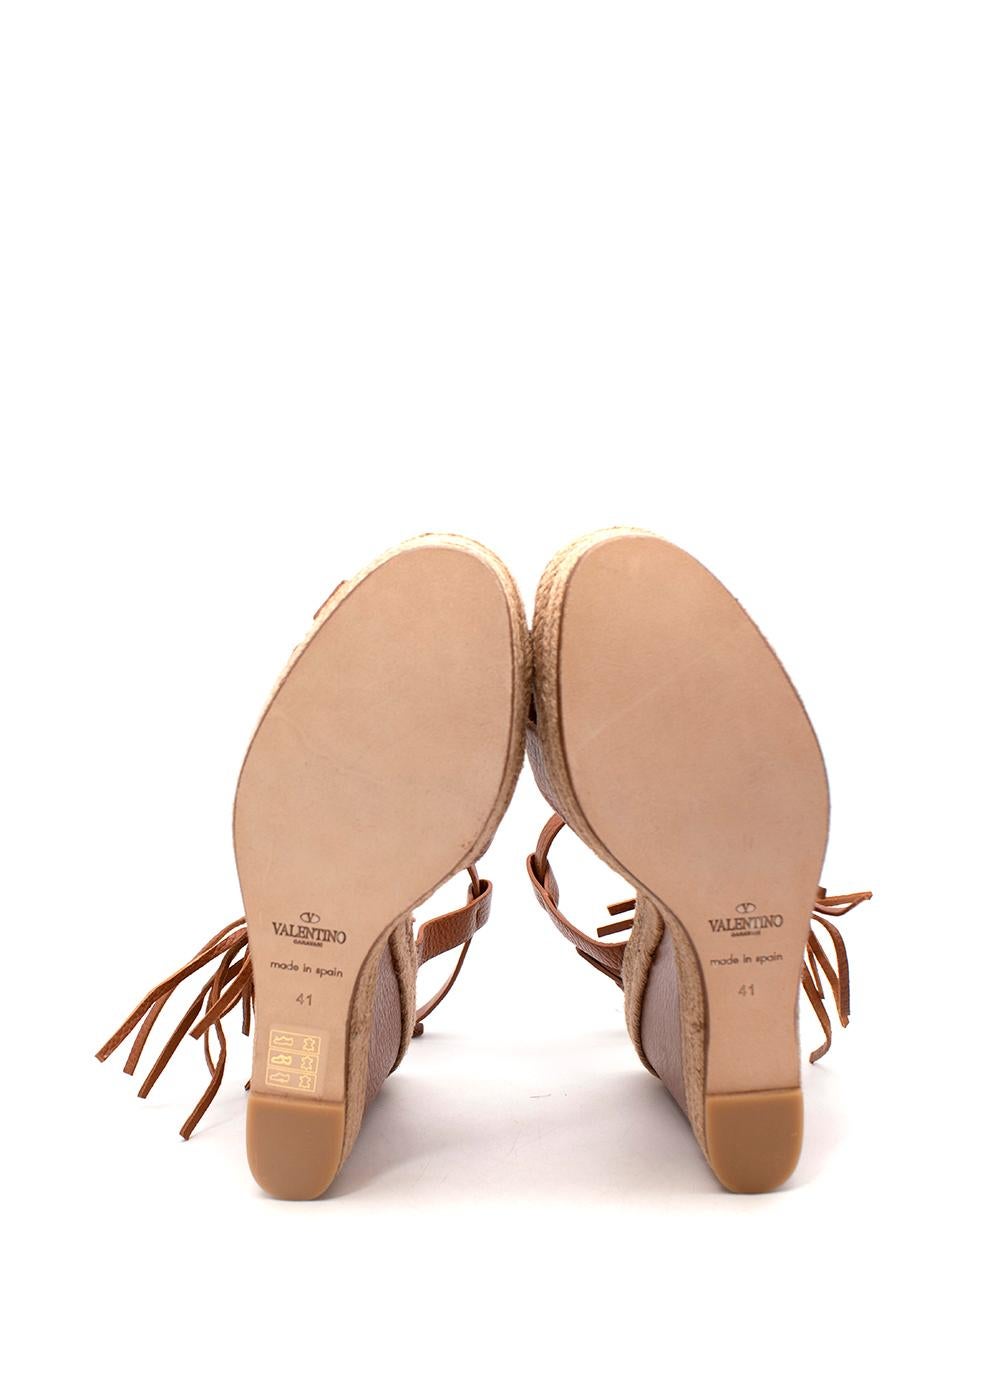 Tan Leather & Jute Wedge Heeled Espadrille Sandals For Sale 4